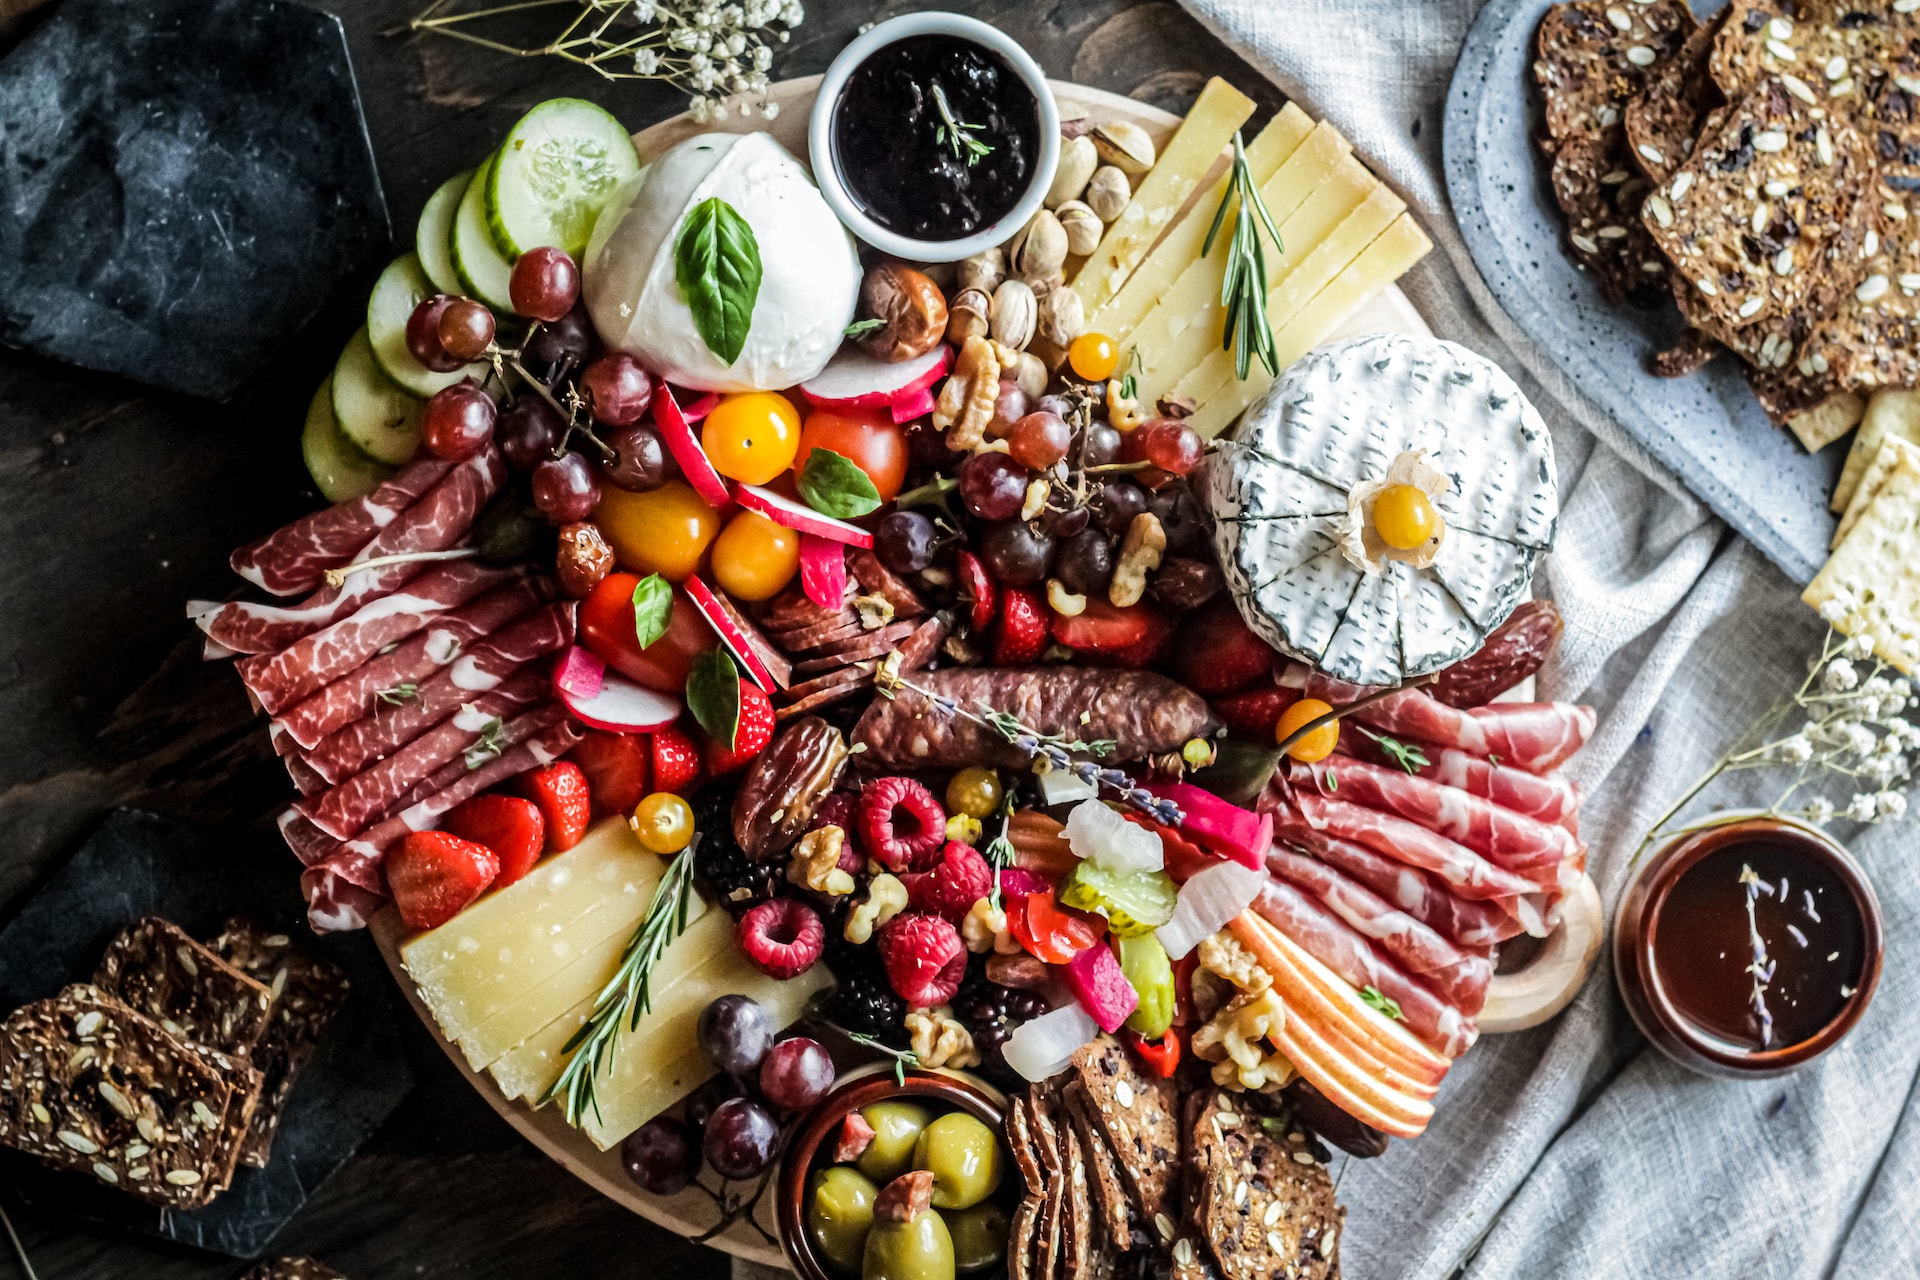 Selection of cheeses, grapes and crackers on a wooden board. 